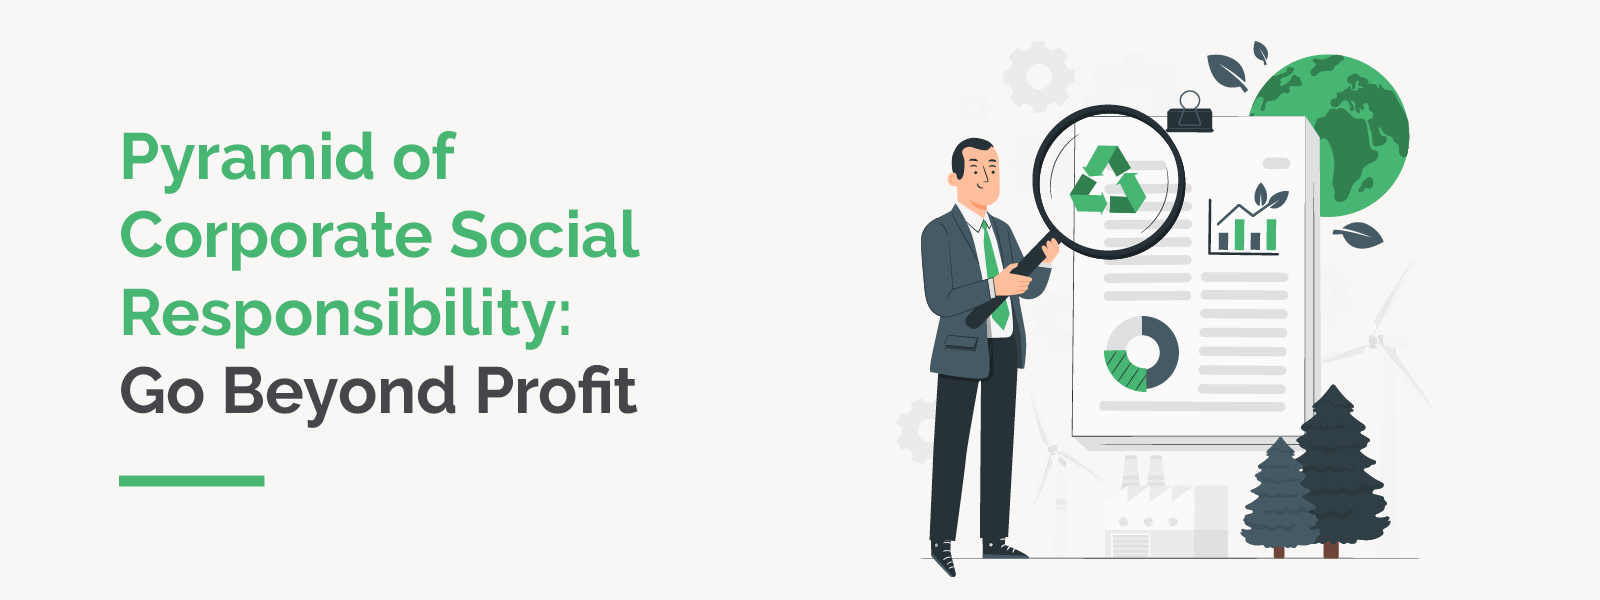 Learn how your business can leverage the pyramid of corporate social responsibility in this guide.